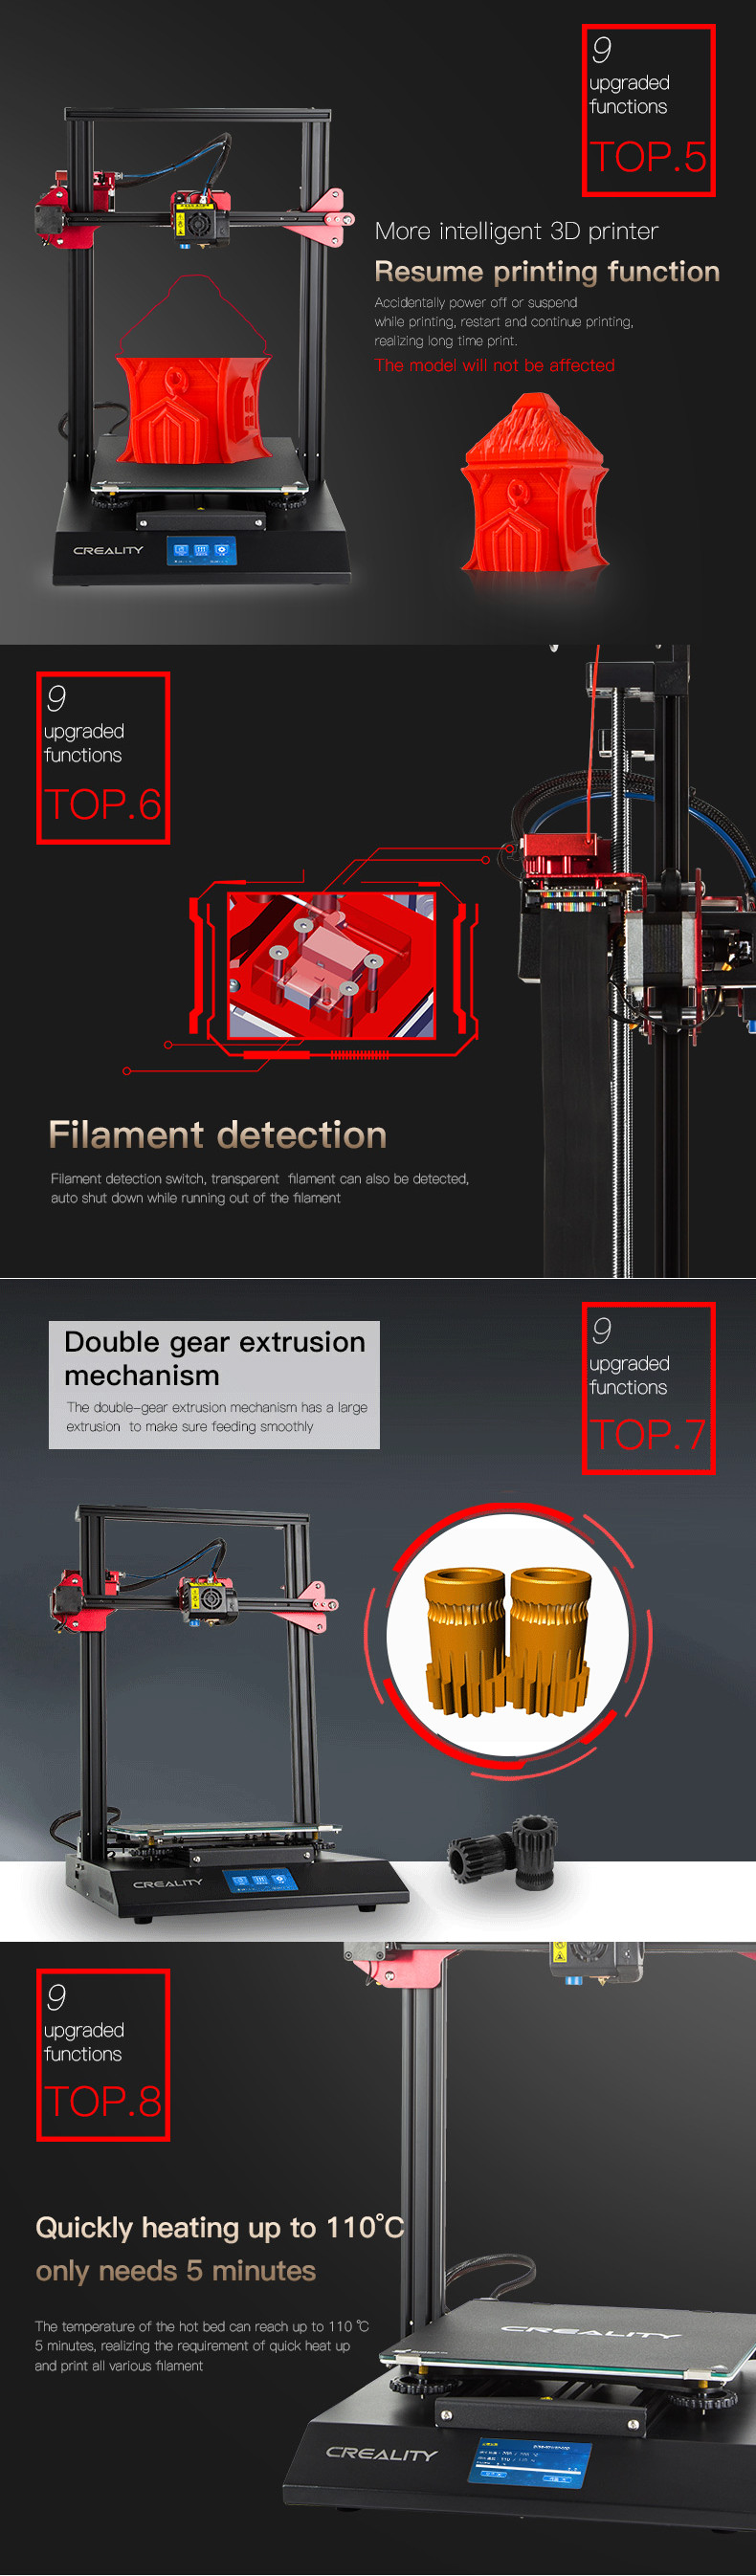 Creality 3D® CR-10S Pro DIY 3D Printer Kit 300*300*400mm Printing Size With Auto Leveling Sensor/Dual Gear Extrusion/4.3inch Touch LCD/Resume Printing 15